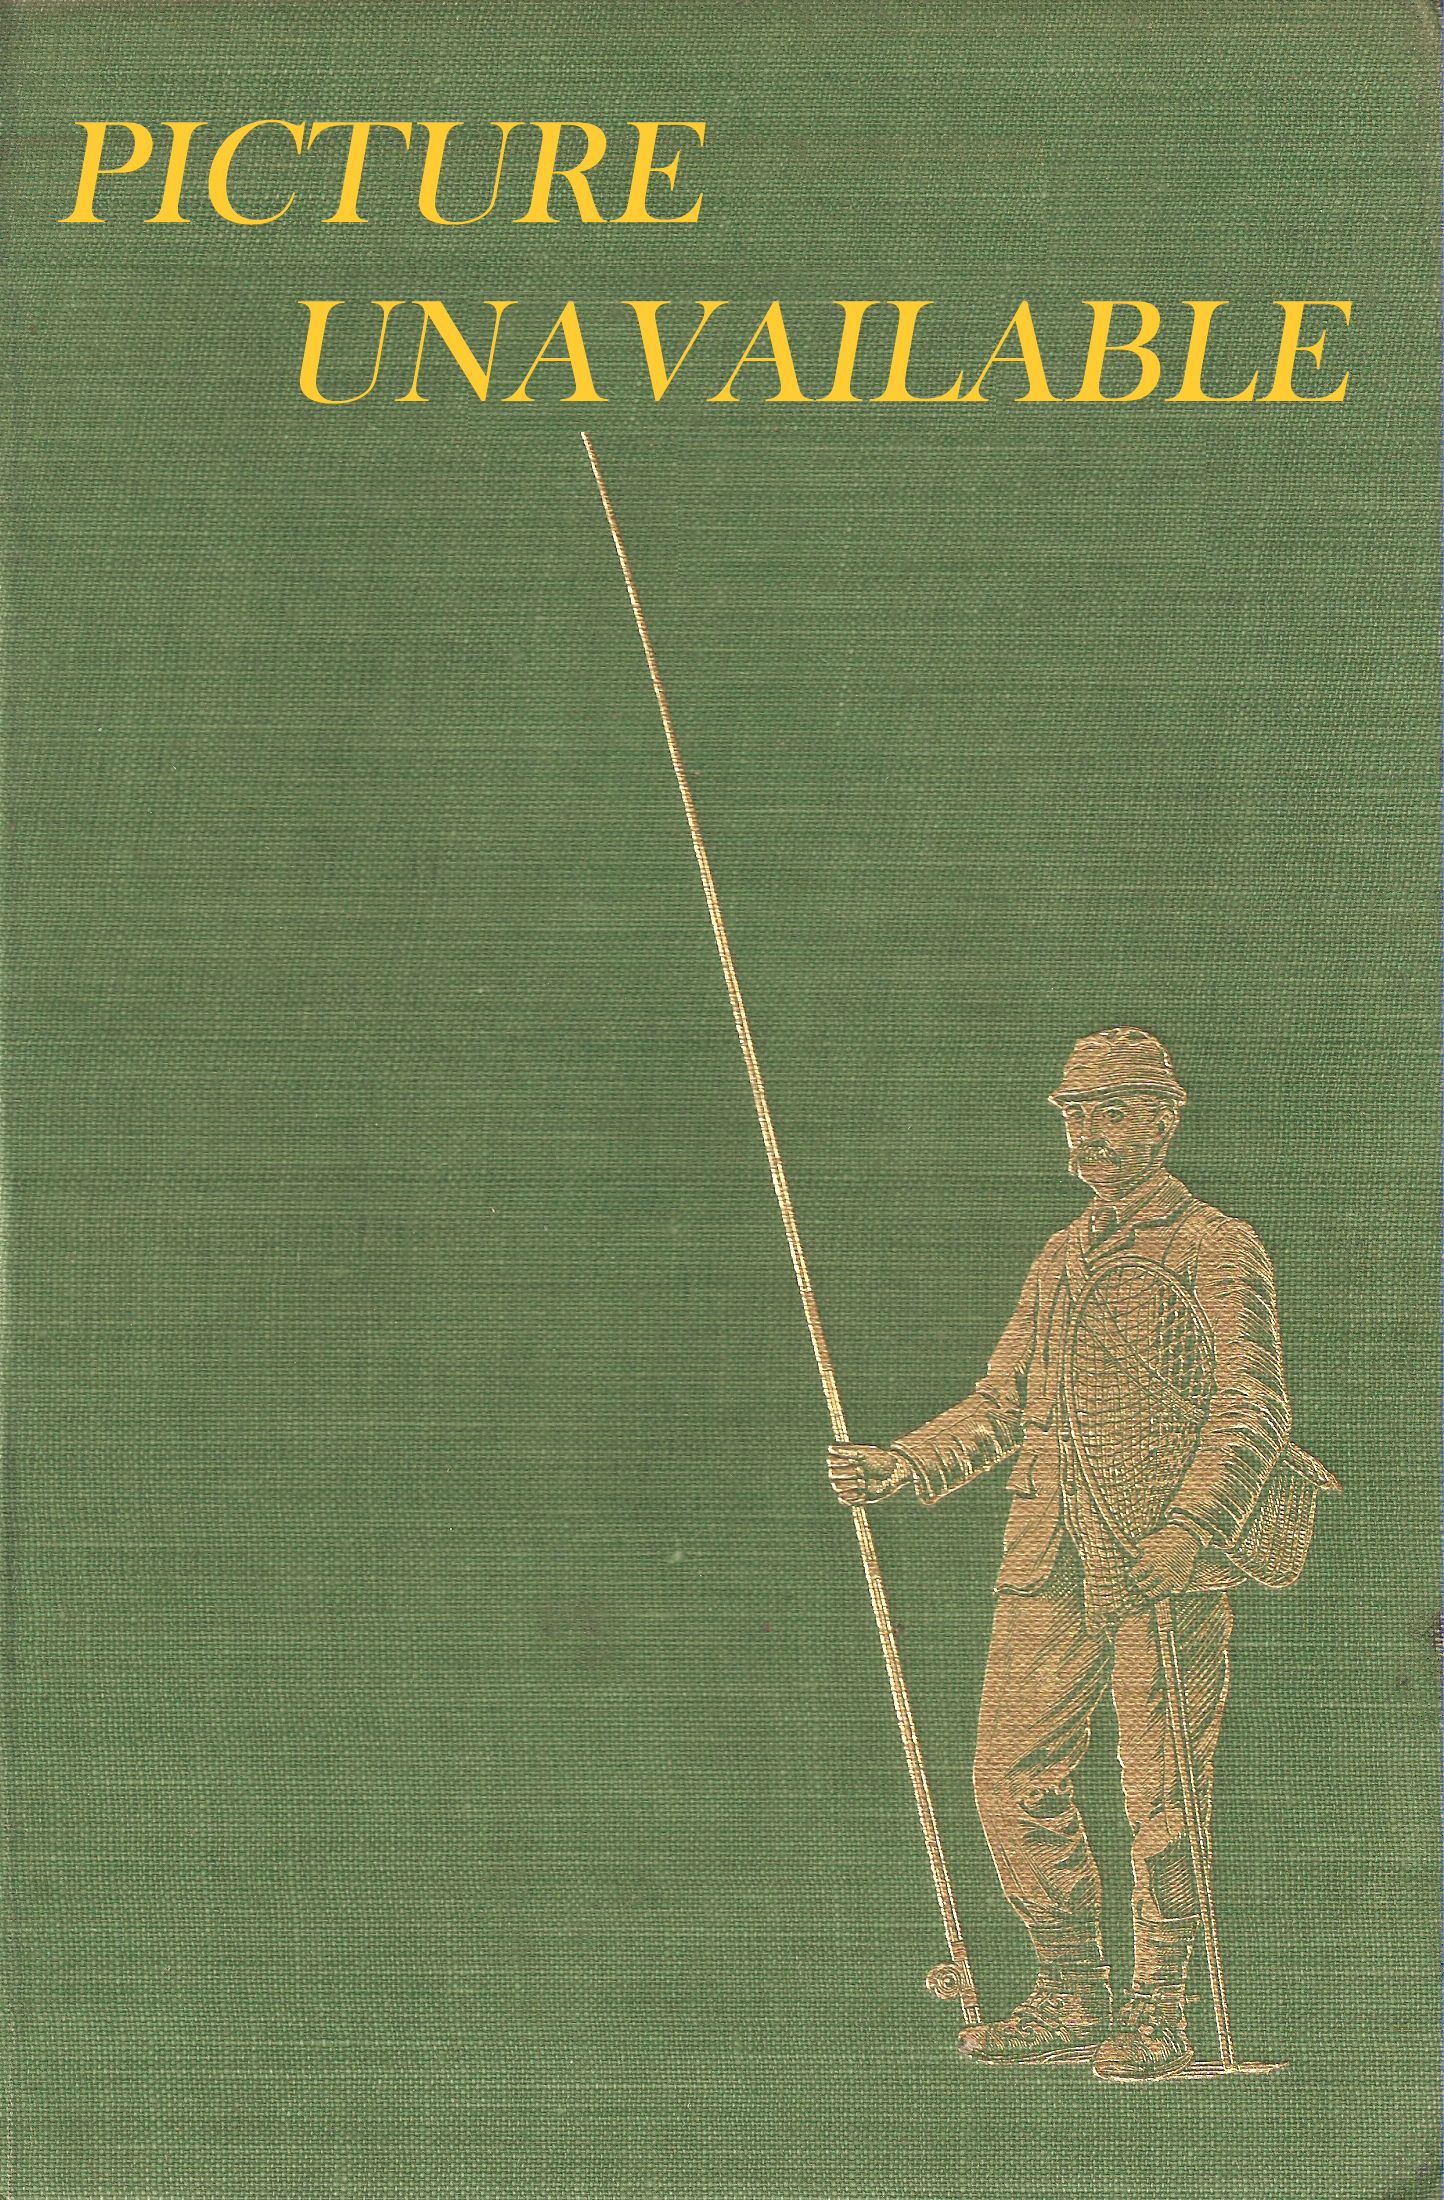 HILL SHOOTING AND UPLAND GAMEKEEPING. By Guy N. Smith. Drawings by Bob  Sanders and Anthea Hadley.